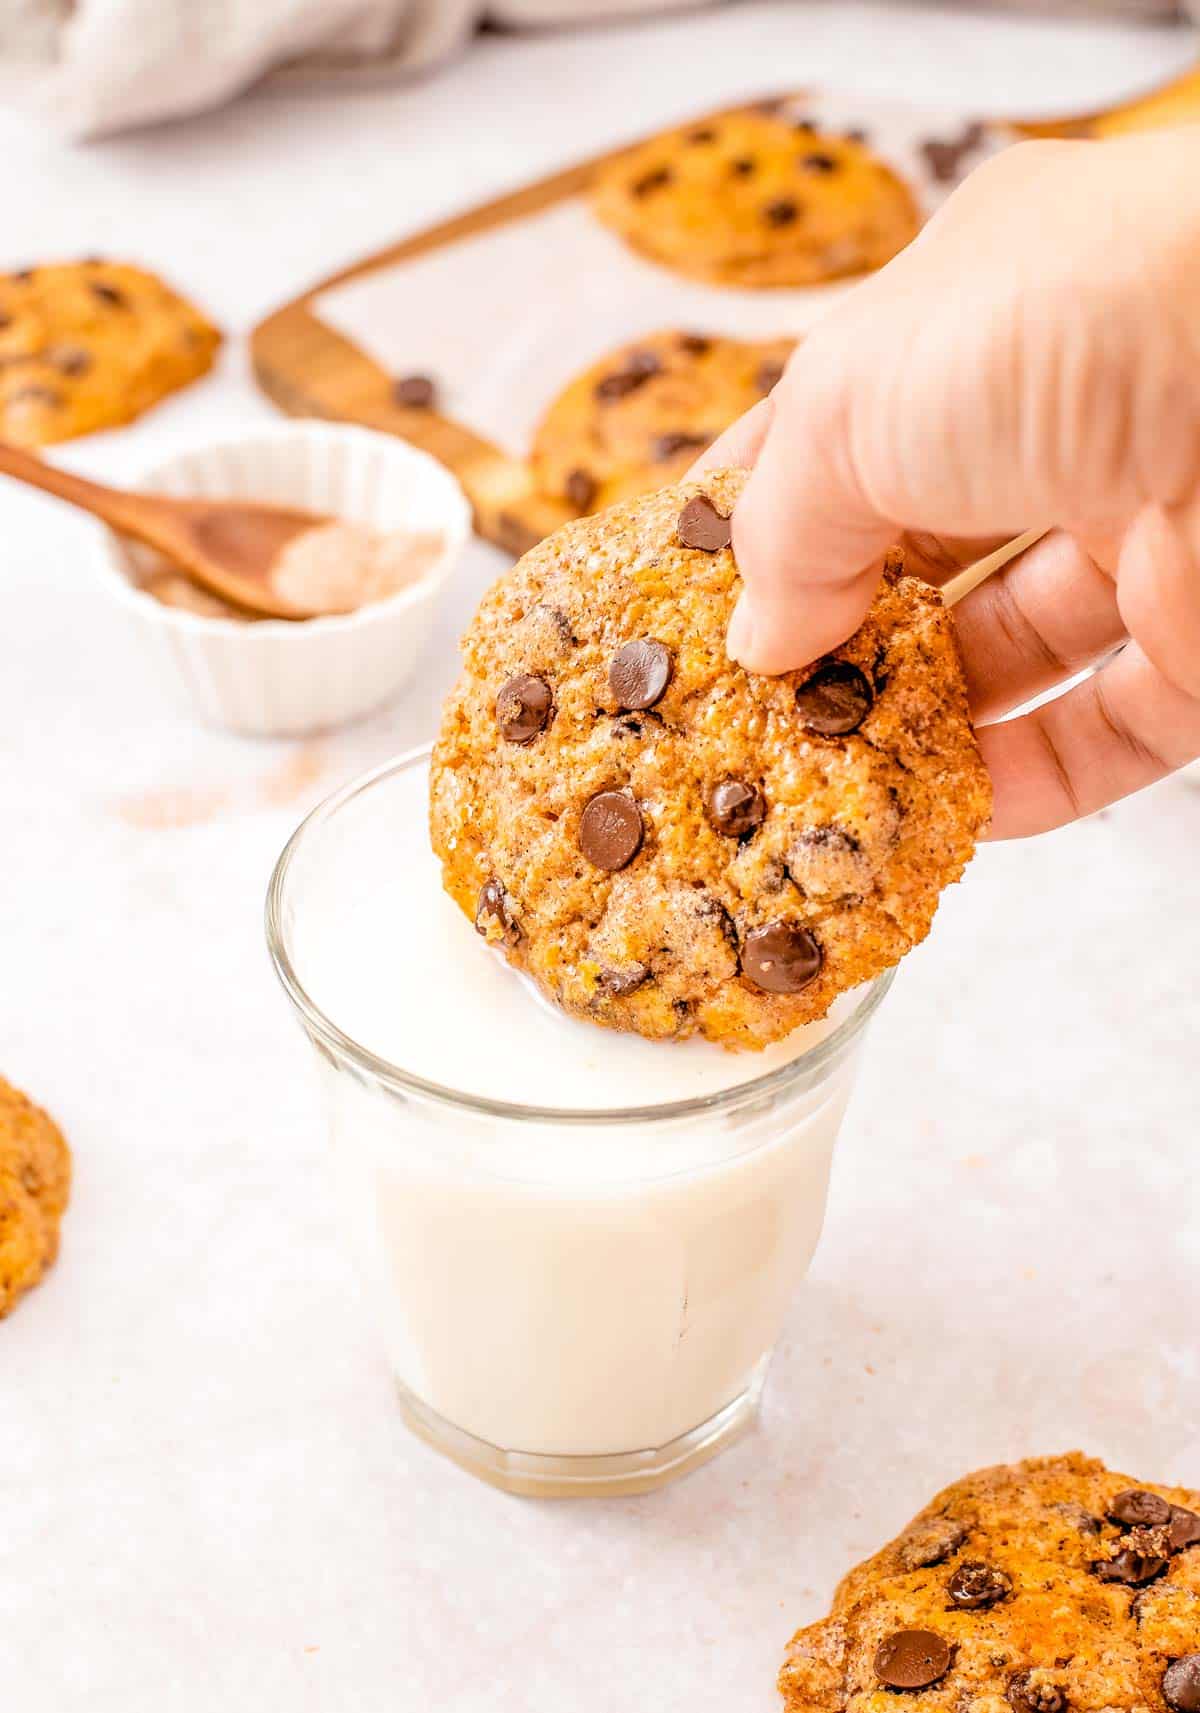 A Chewy Pumpkin Chocolate Chip Cookies being dunked into a glass of milk.